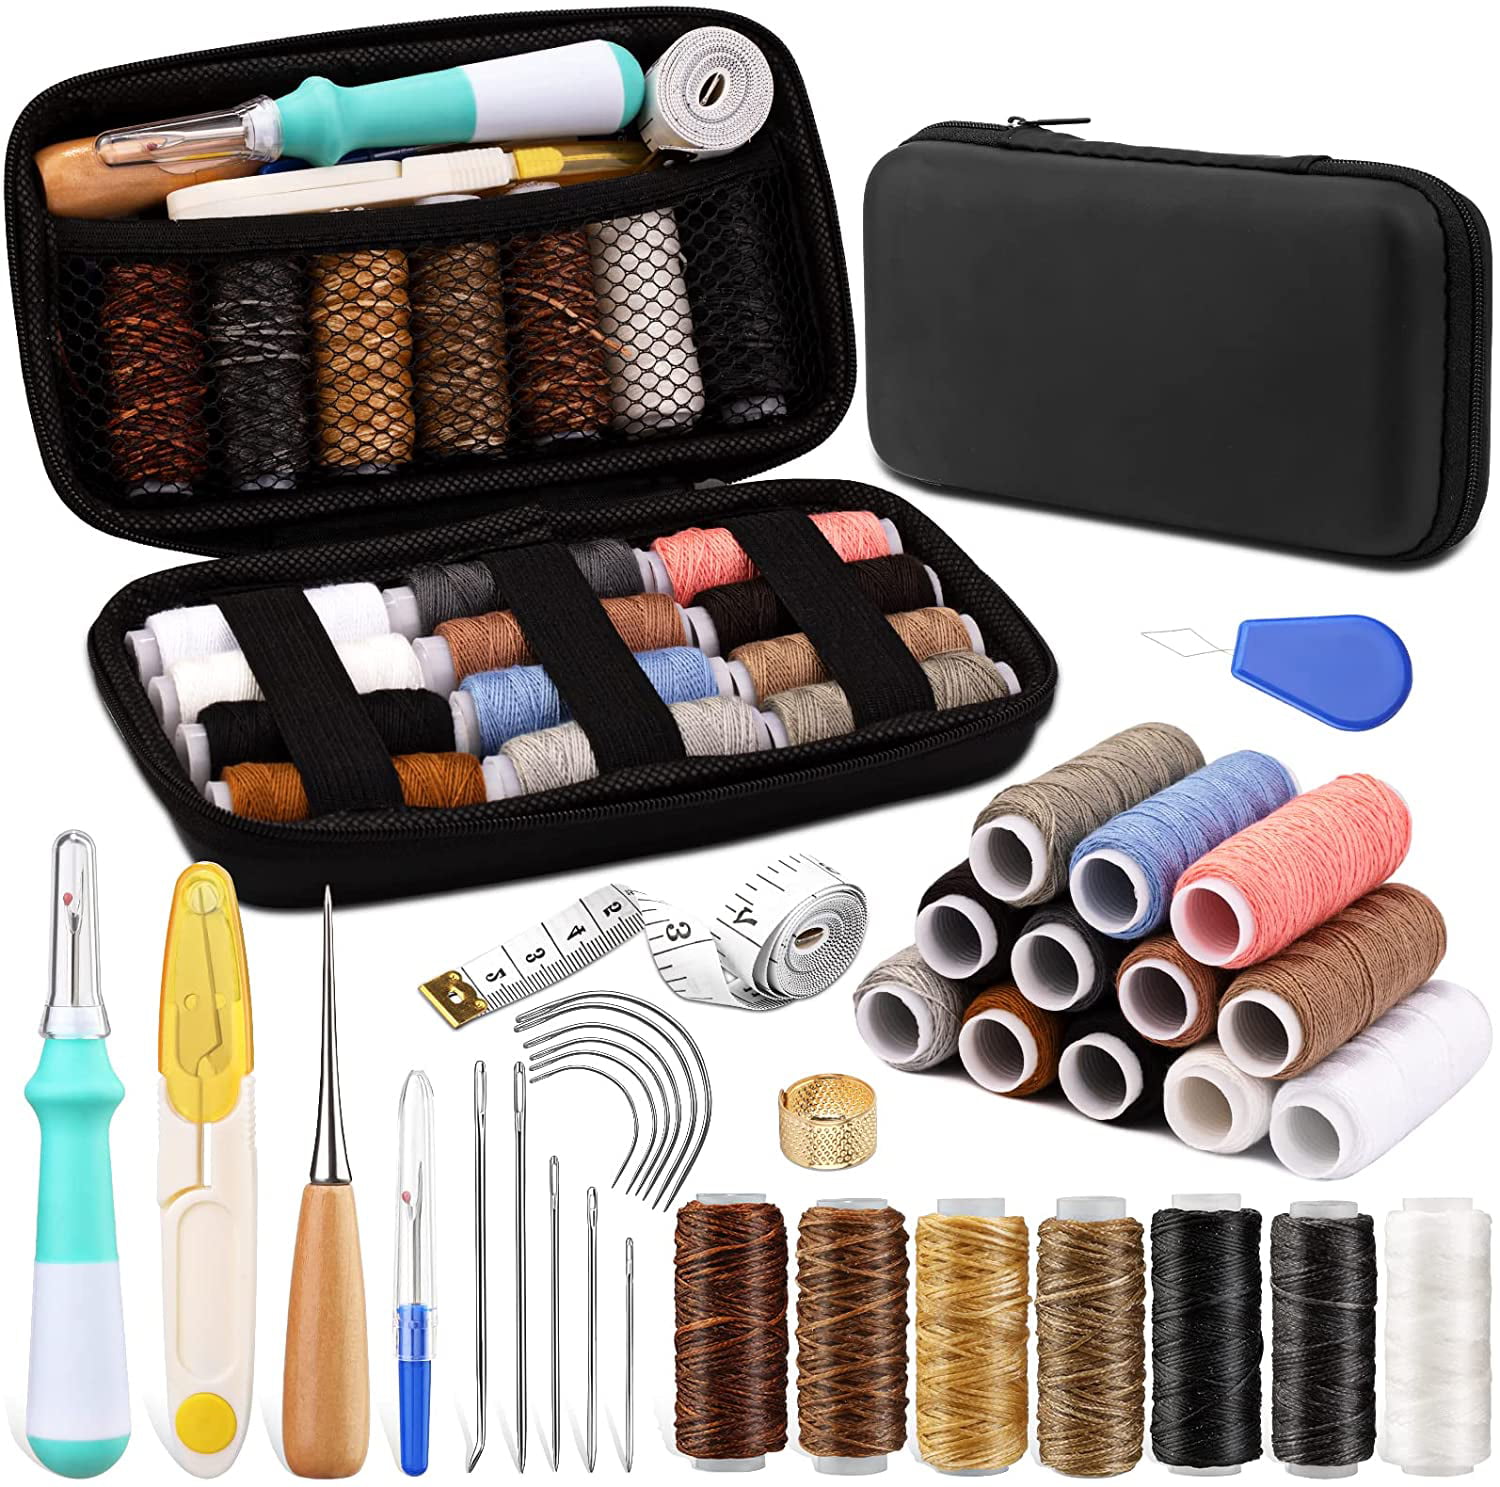 MORFEN Leather Sewing Kit, 38 Pcs Leather Working Kit, Leather Sewing Upholstery Repair